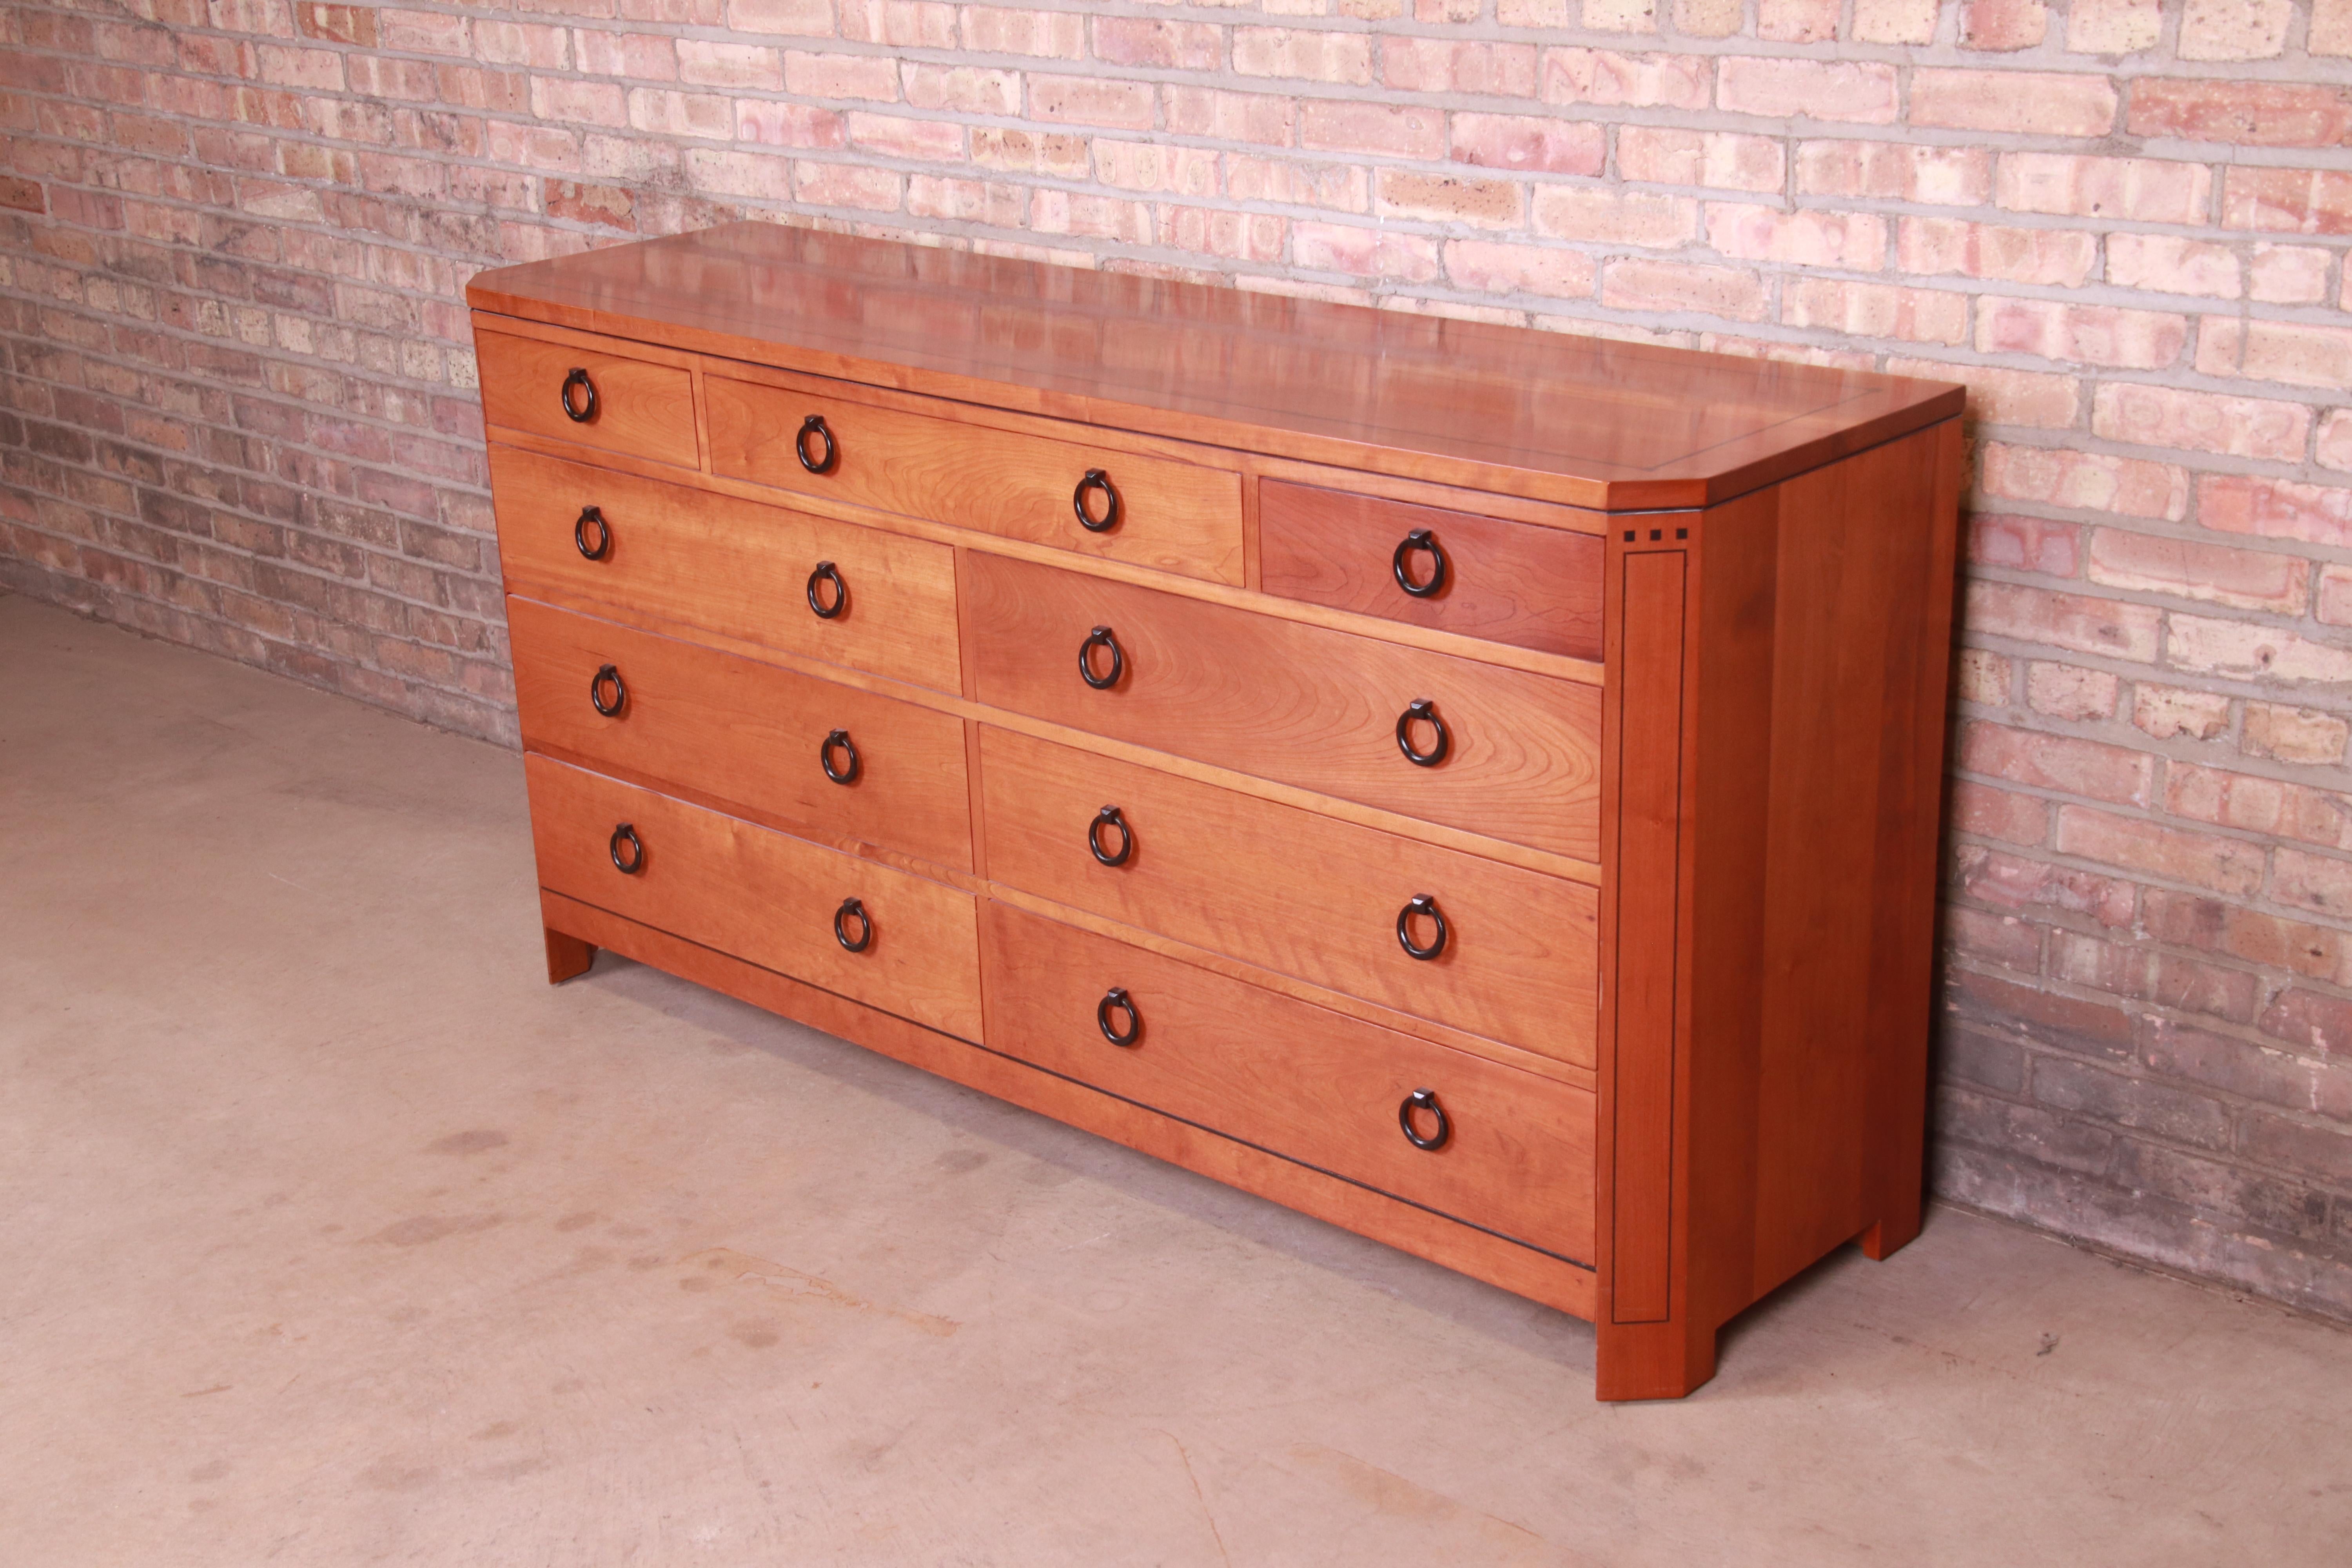 A gorgeous Arts & Crafts style nine-drawer dresser or credenza

By L. & J.G. Stickley

USA, Circa 2000

Solid cherry wood, with inlaid ebonized details and original hardware.

Measures: 68.5